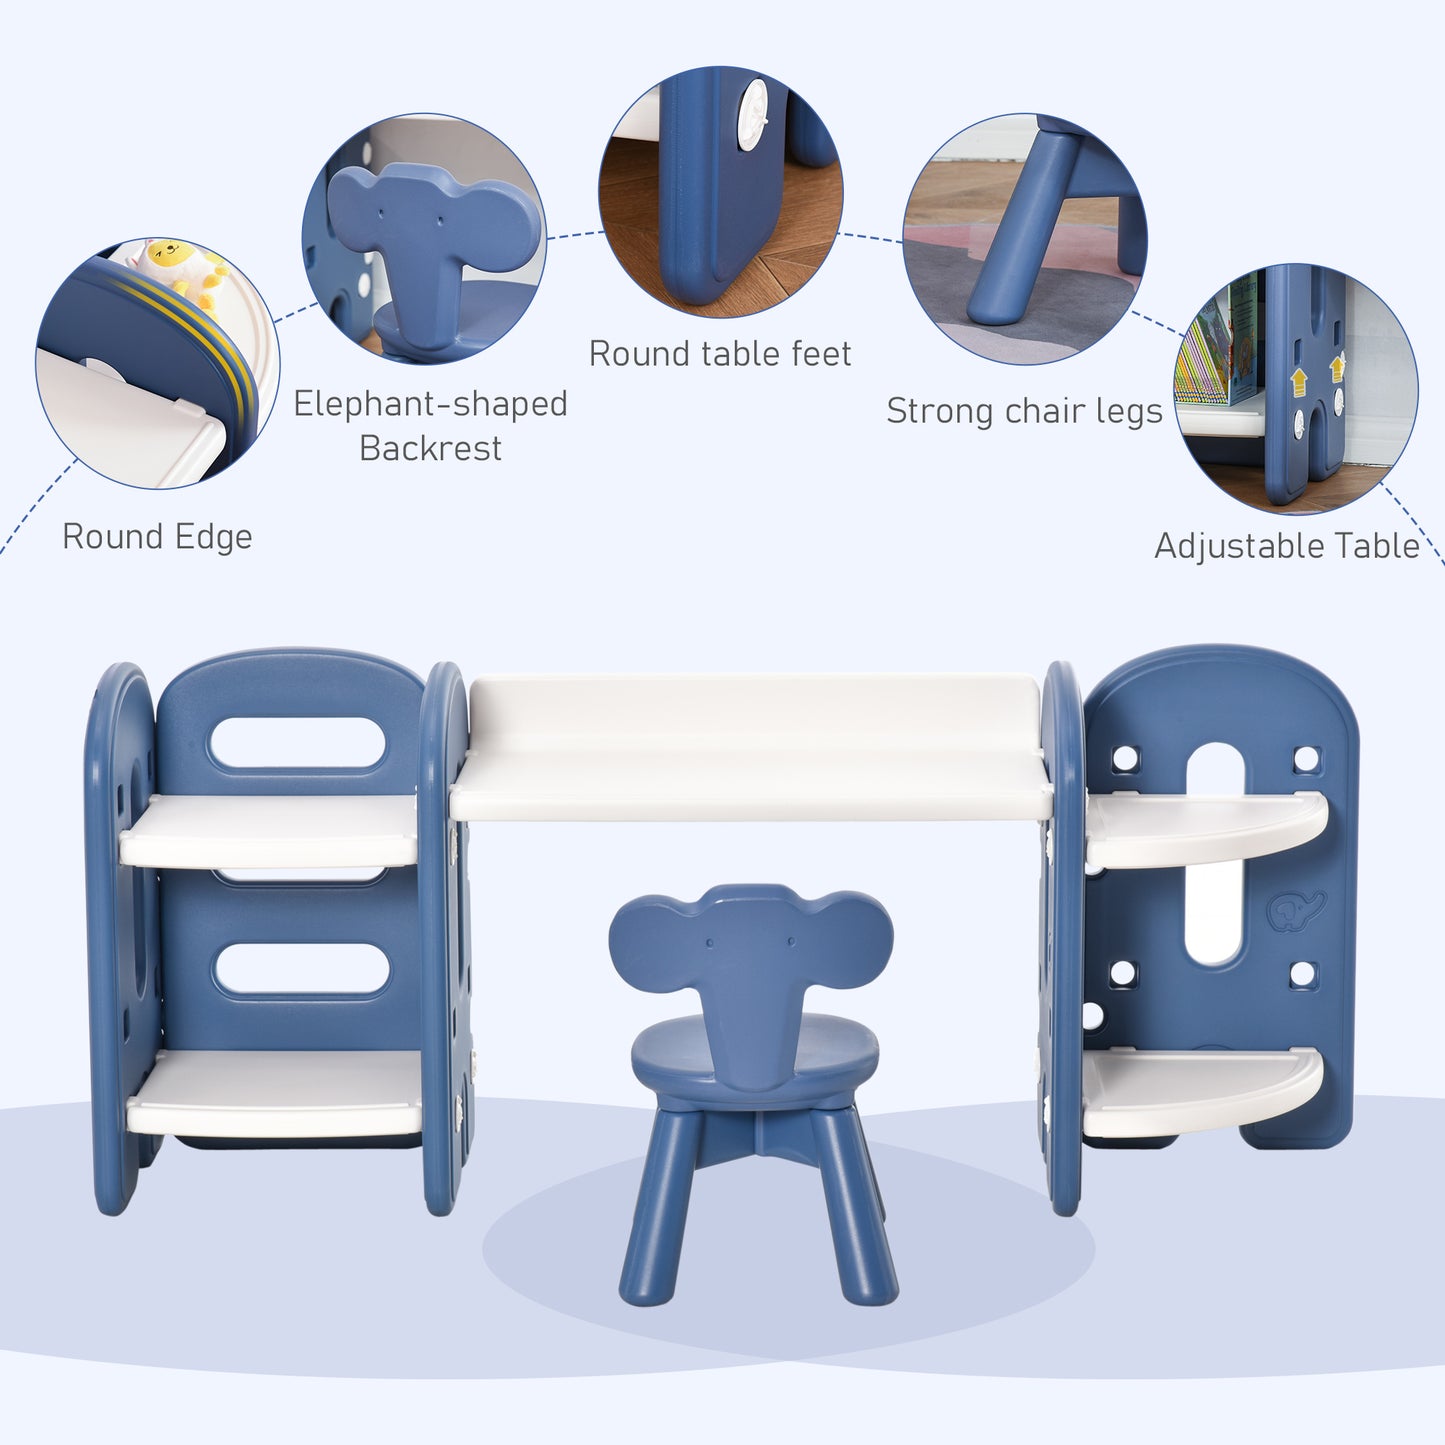 Qaba Kids Adjustable Table and Chair Set 2 Piece Play Table with Storage Children's Playroom/Bedroom Furniture Toddler PE Blue and white for 1-4 years old